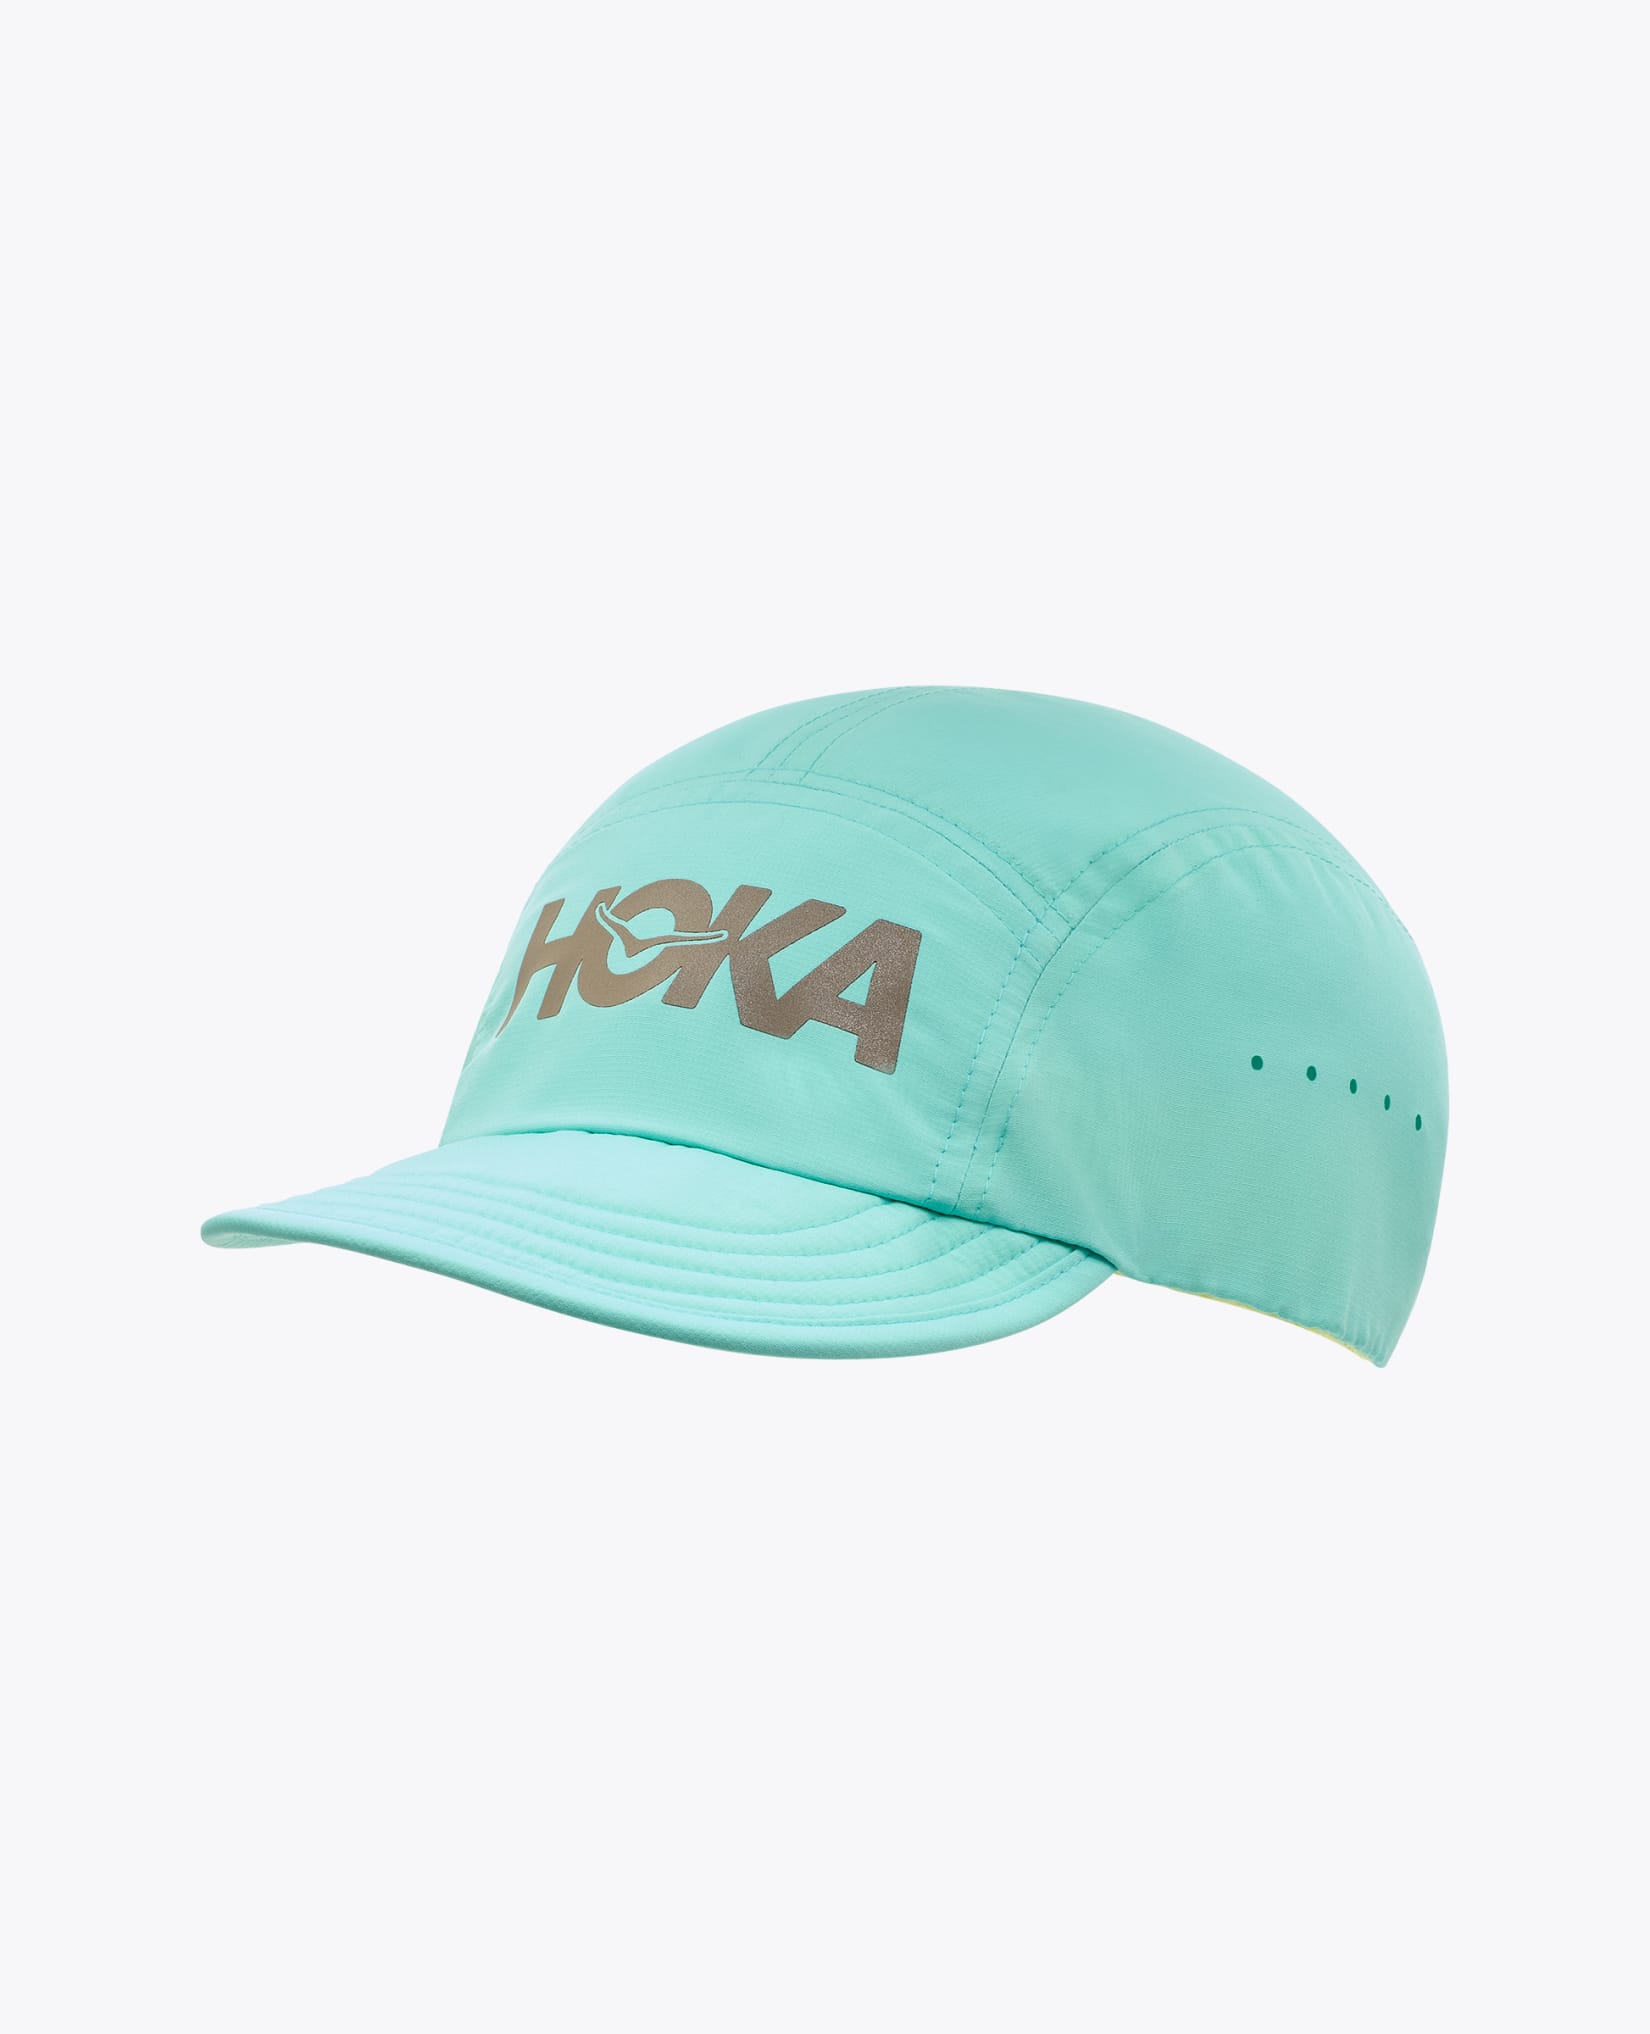 All Gender Packable Trail Hat